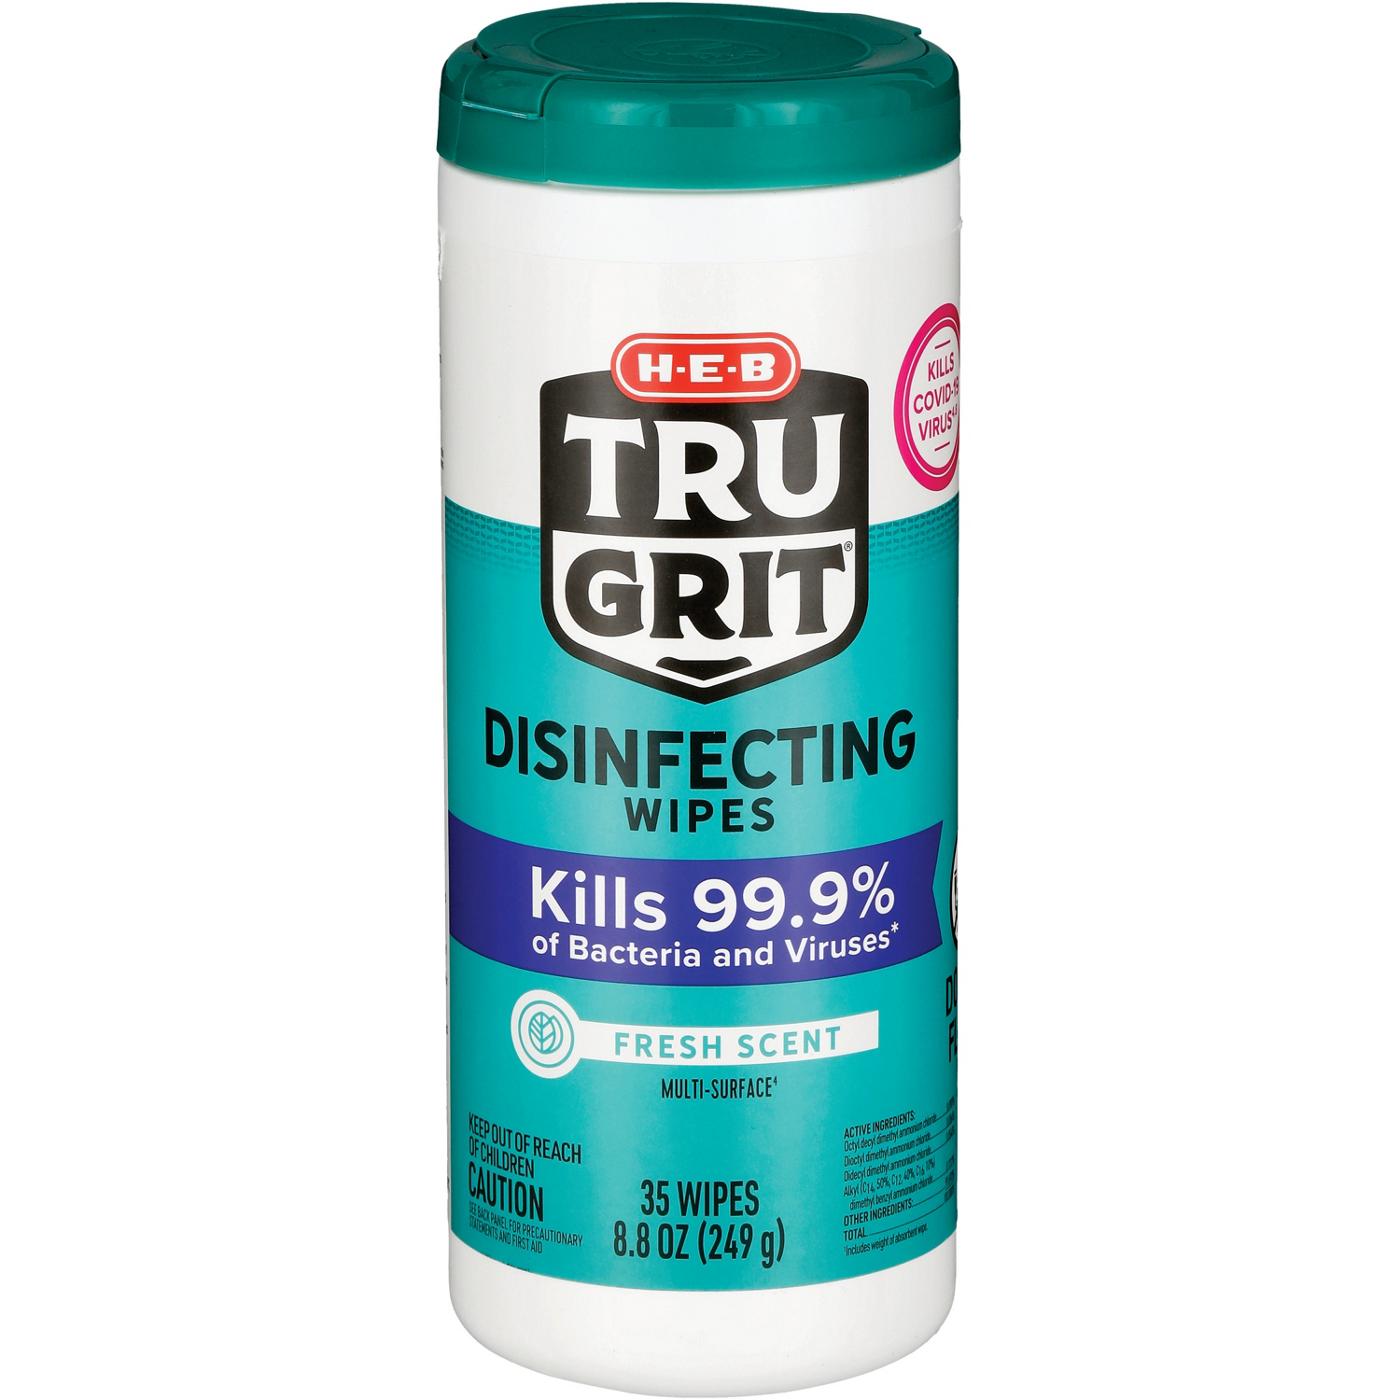 H-E-B Tru Grit Disinfecting Wipes – Fresh Scent; image 2 of 2